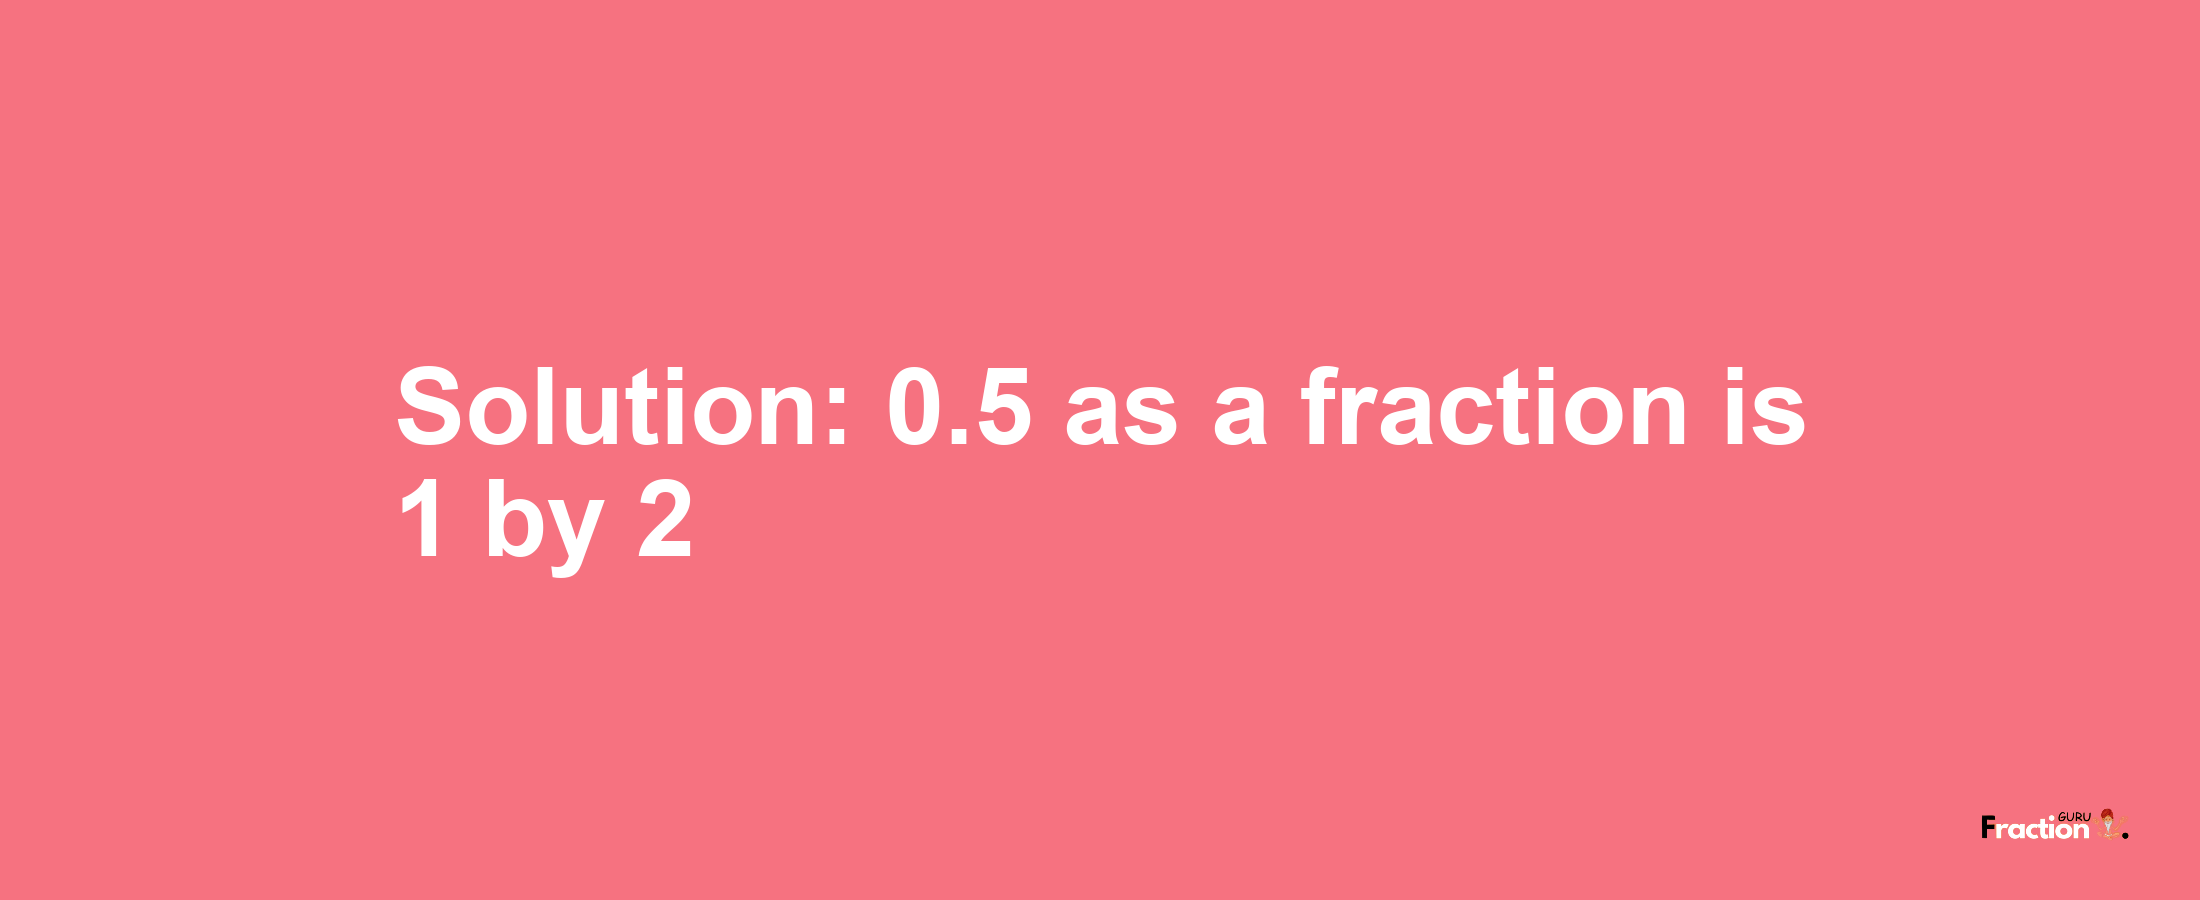 Solution:0.5 as a fraction is 1/2